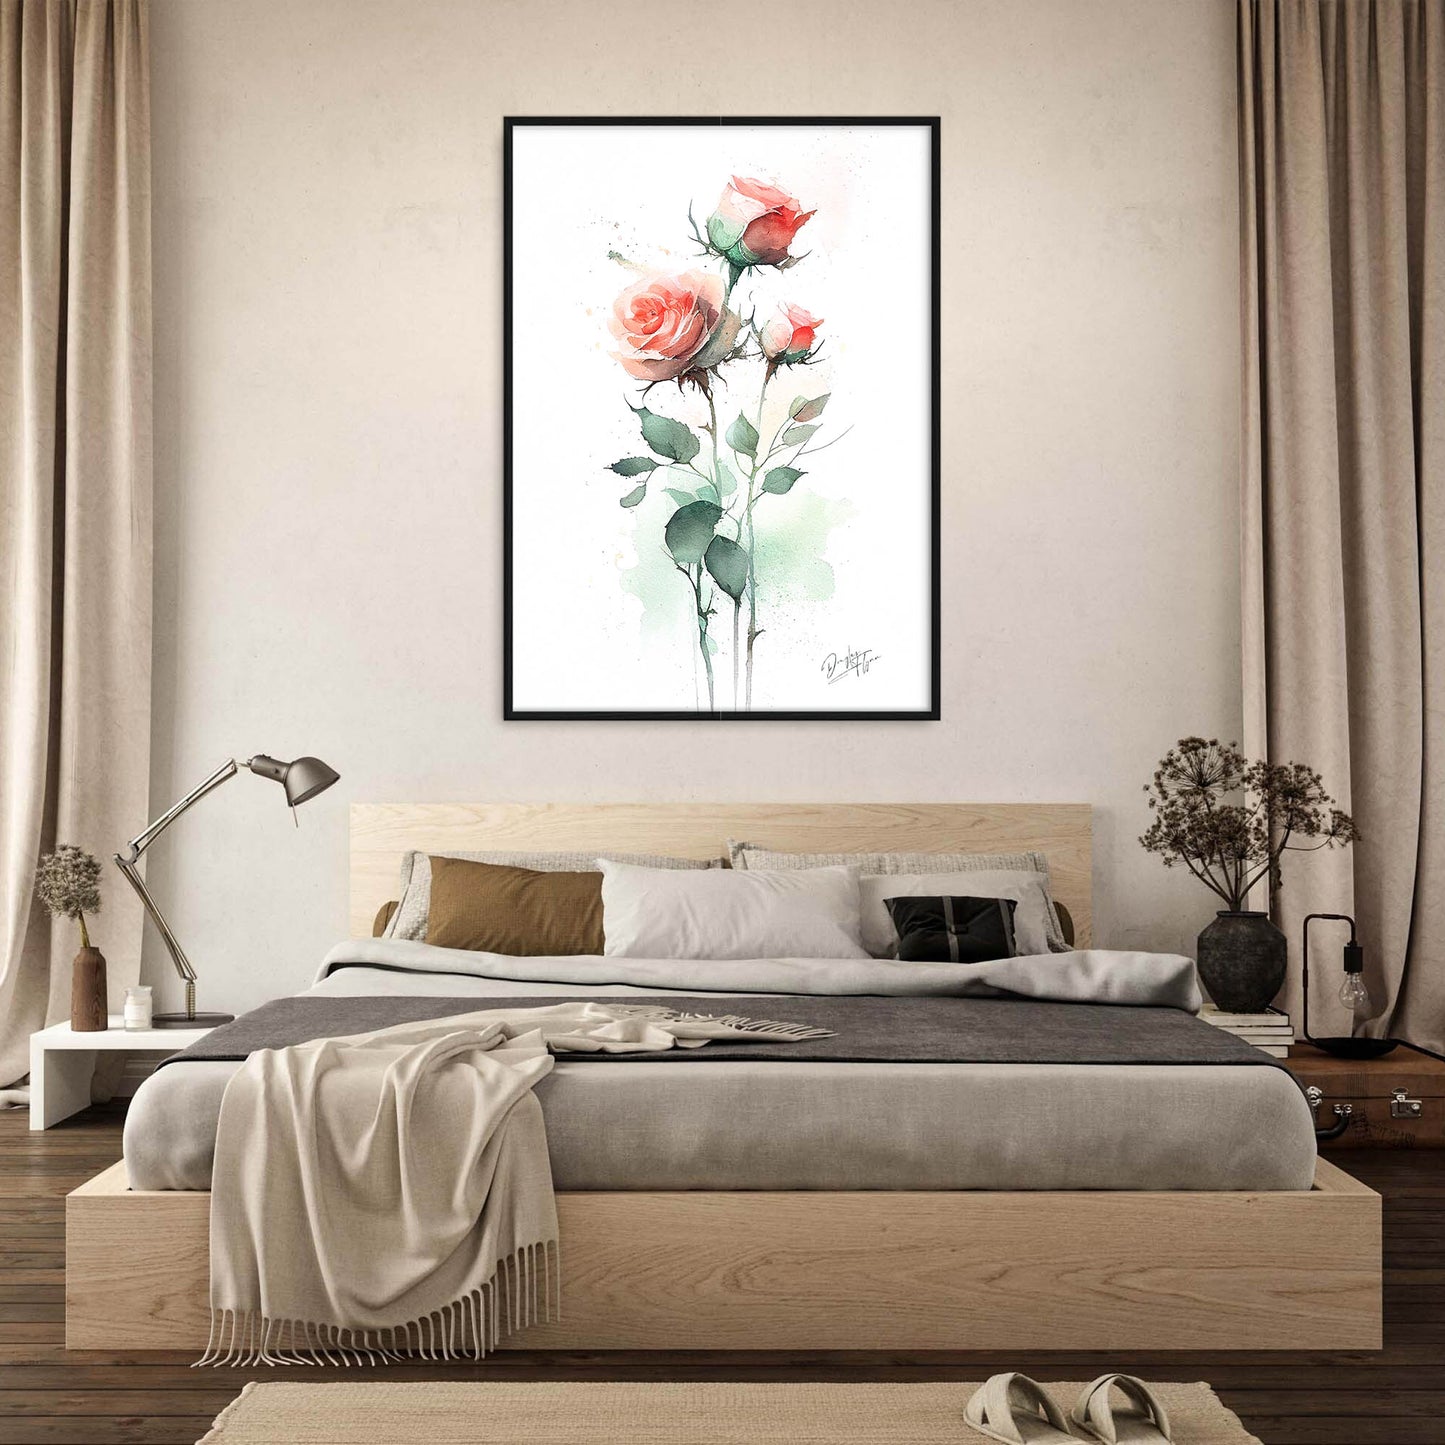 »Rose Waves of Colorful Serendipity« retro poster